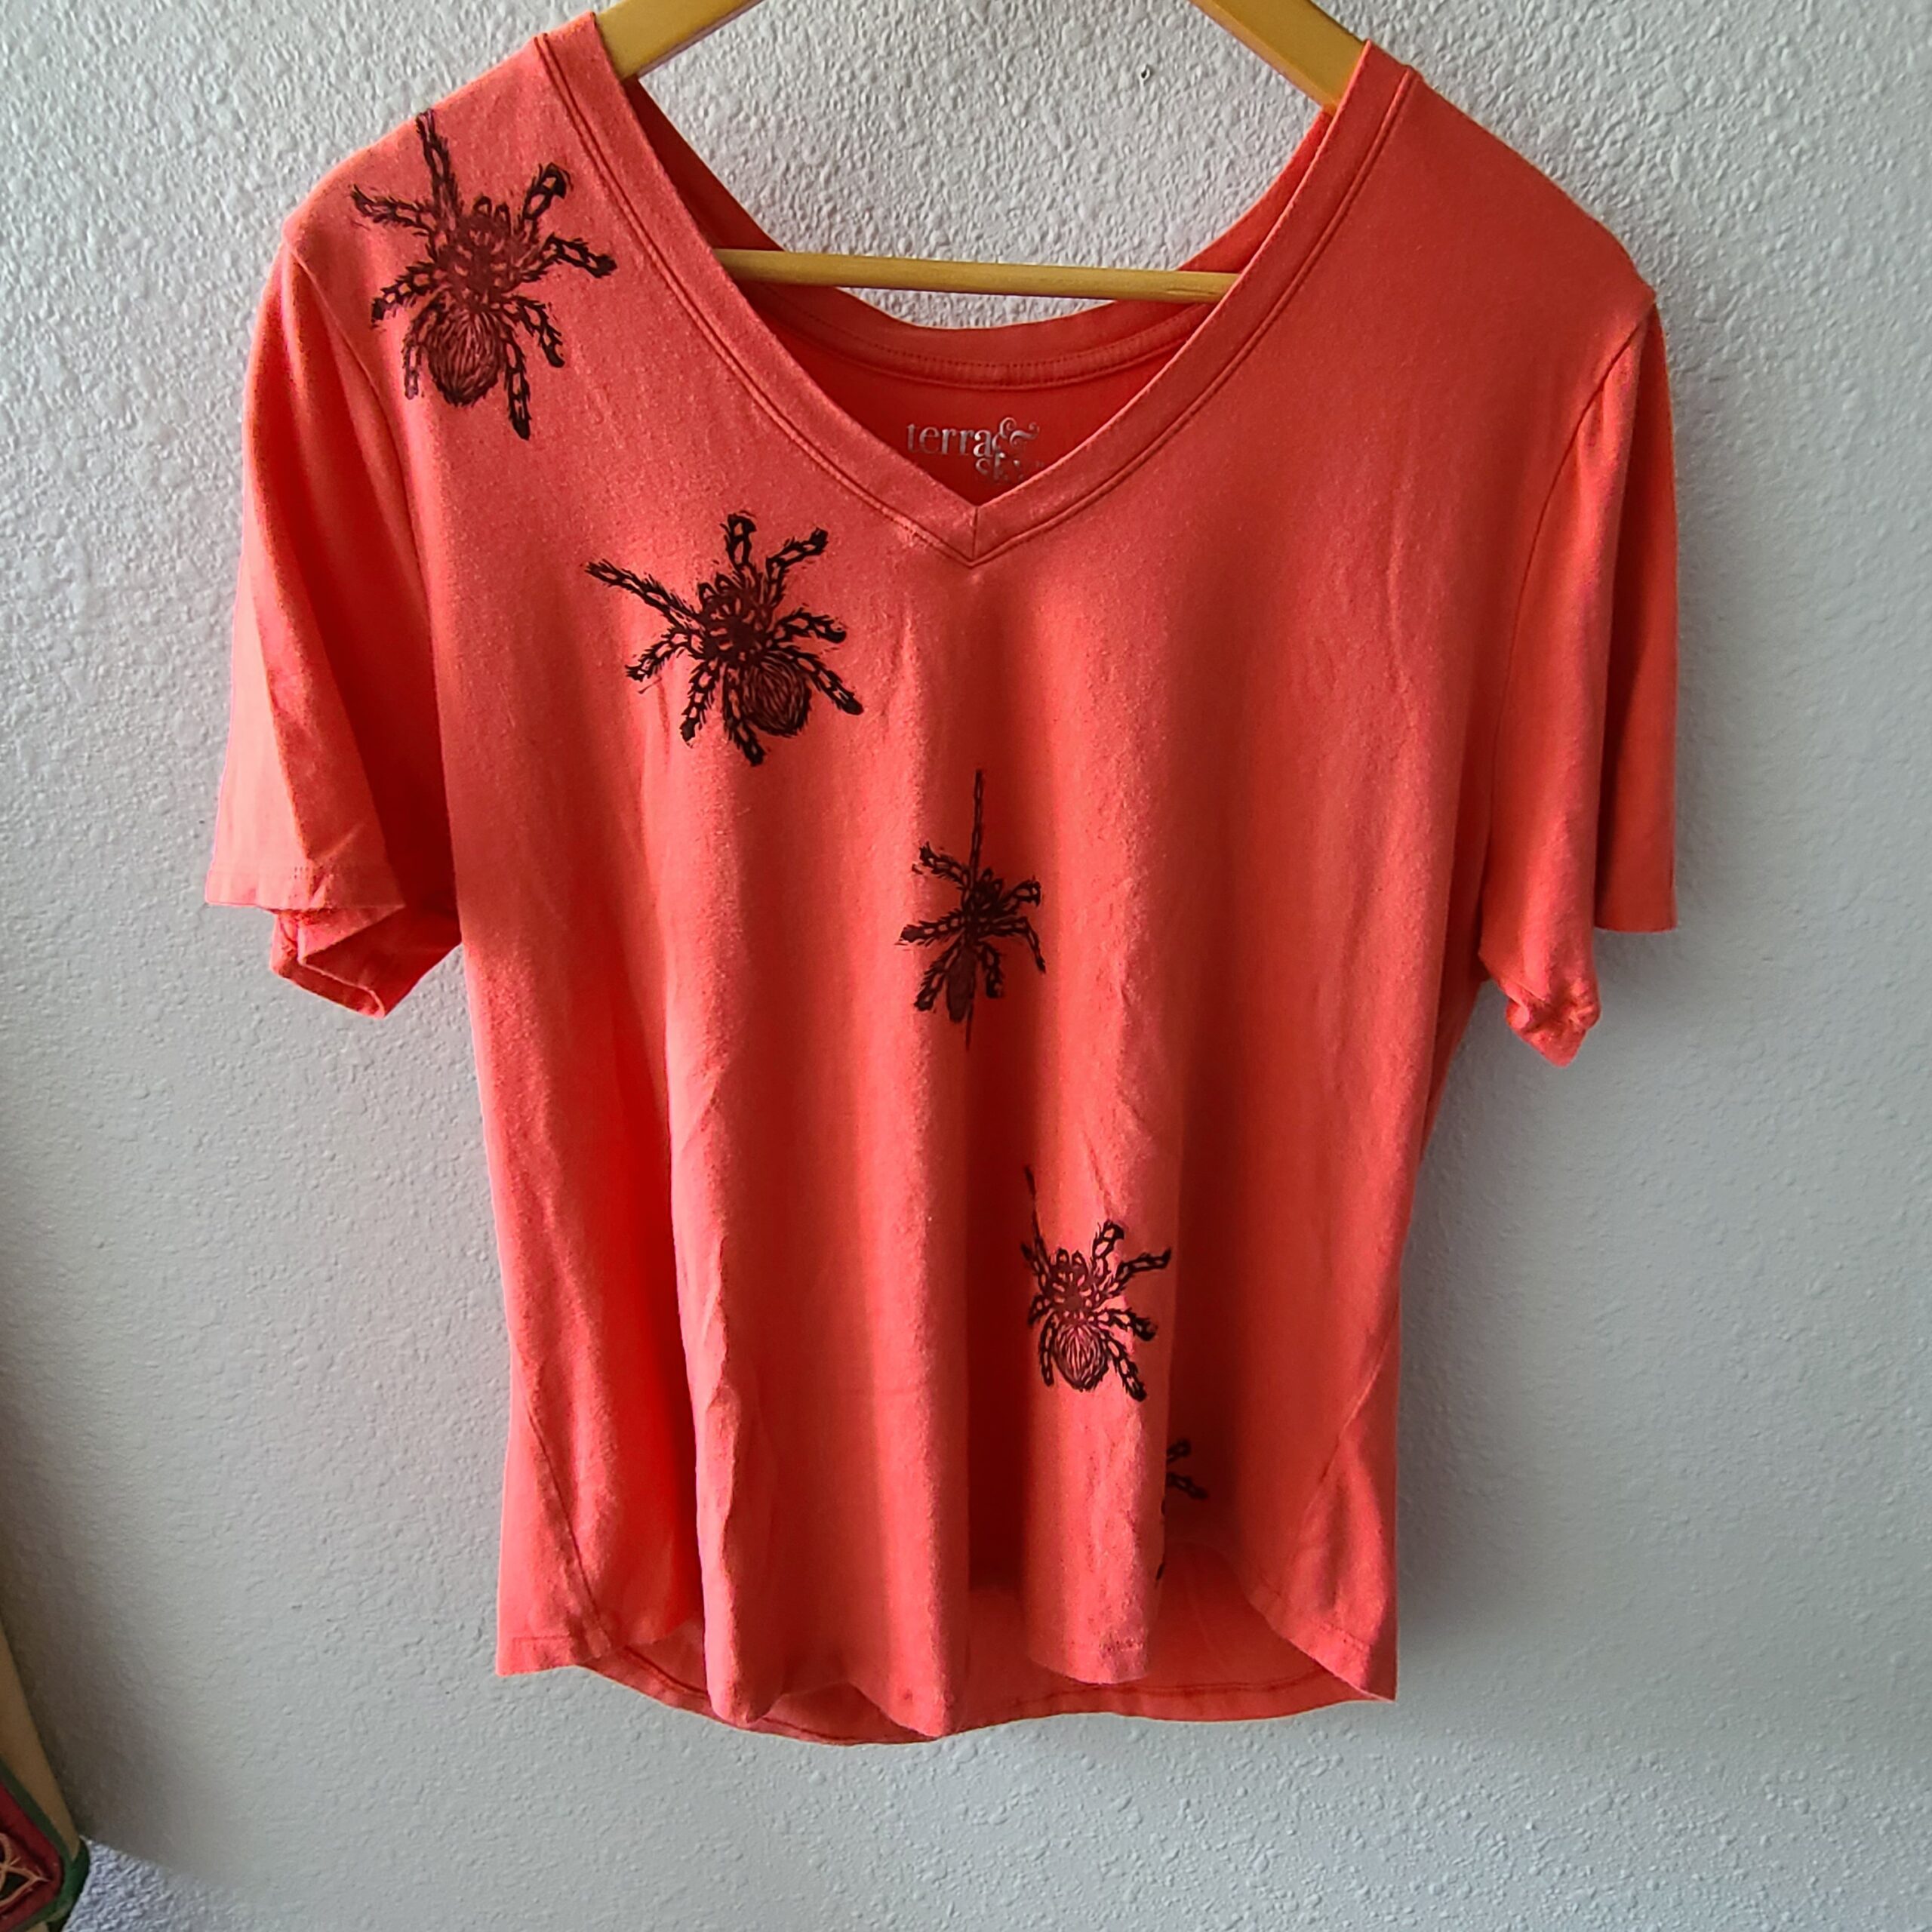 an orange t - shirt with spiders on it.